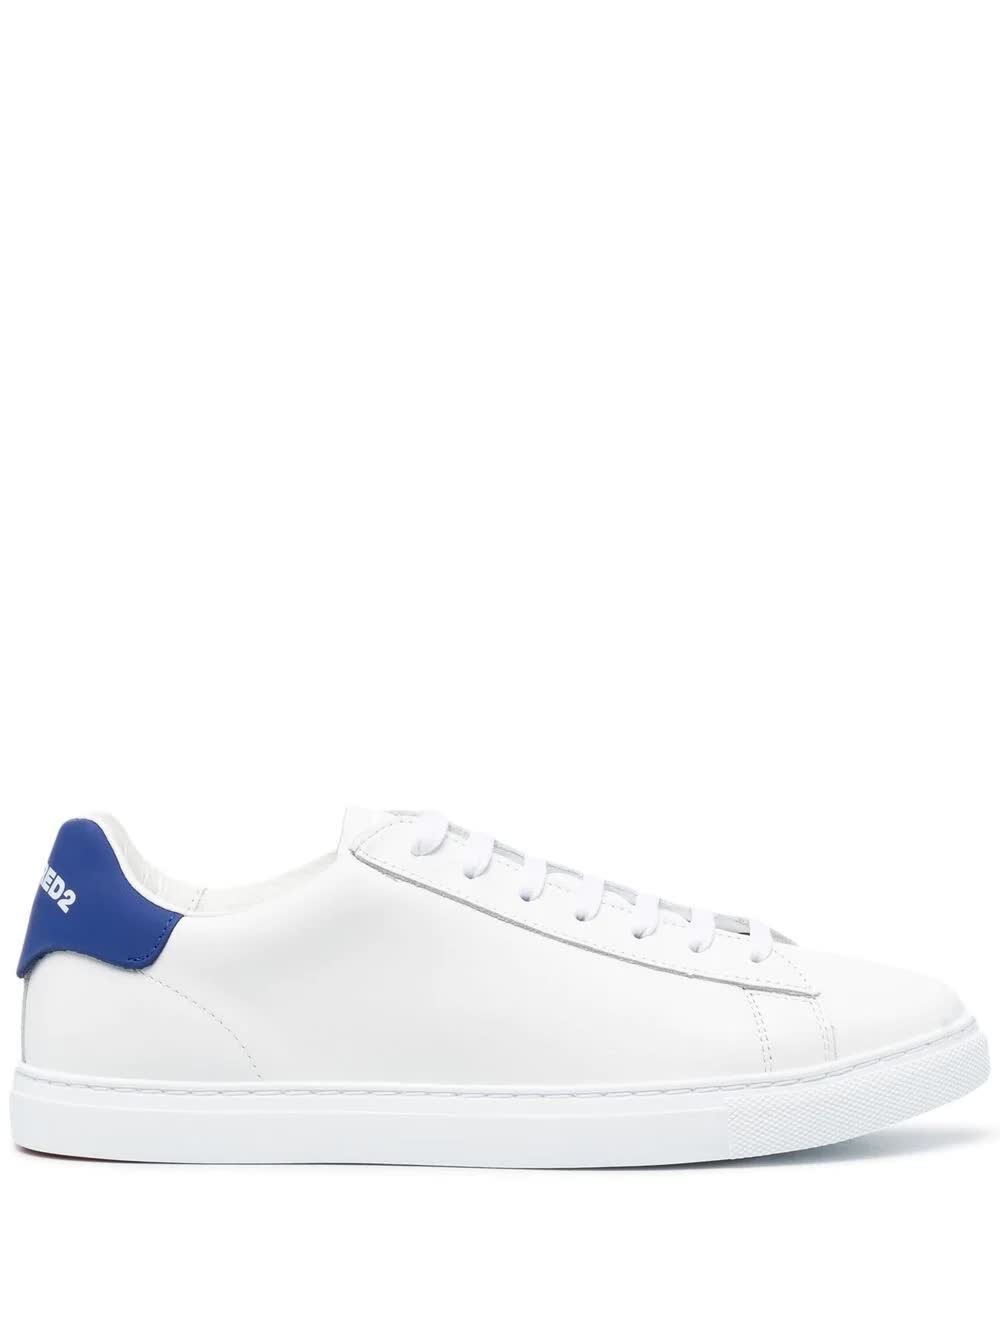 DSQUARED2 MAN WHITE AND BLUE NEW TENNIS SNEAKERS,SNM0005-11570001 M328